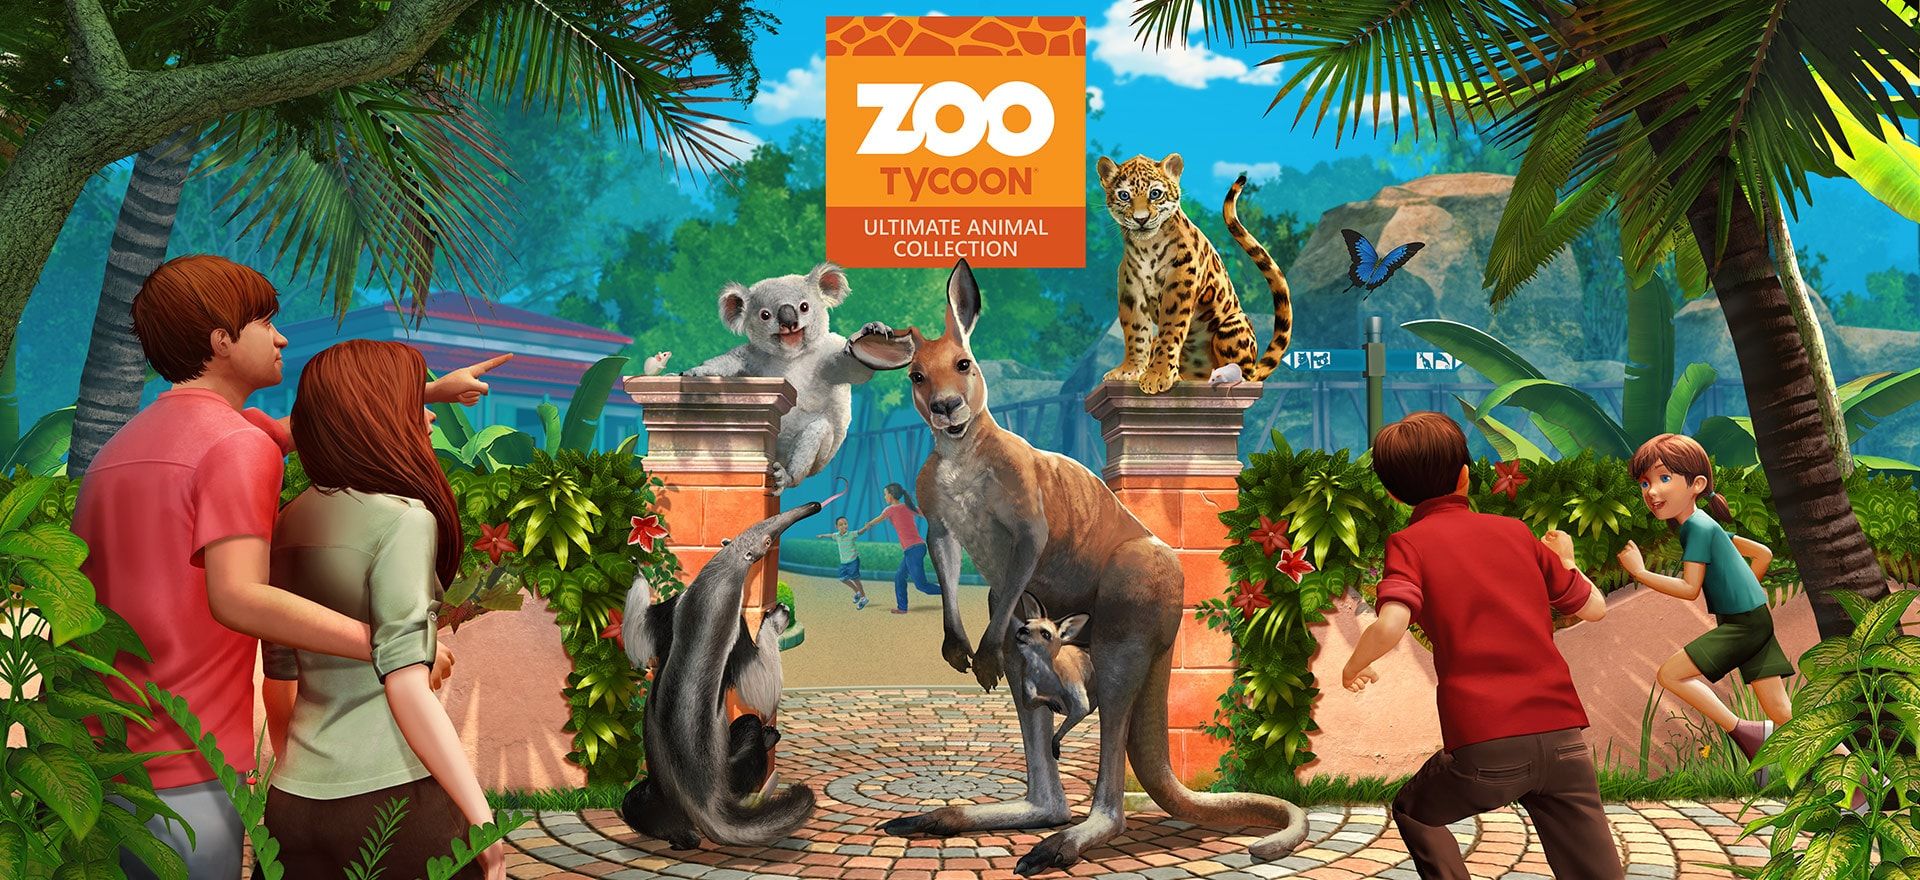 Zoo tycoon ultimate animal collection wiki